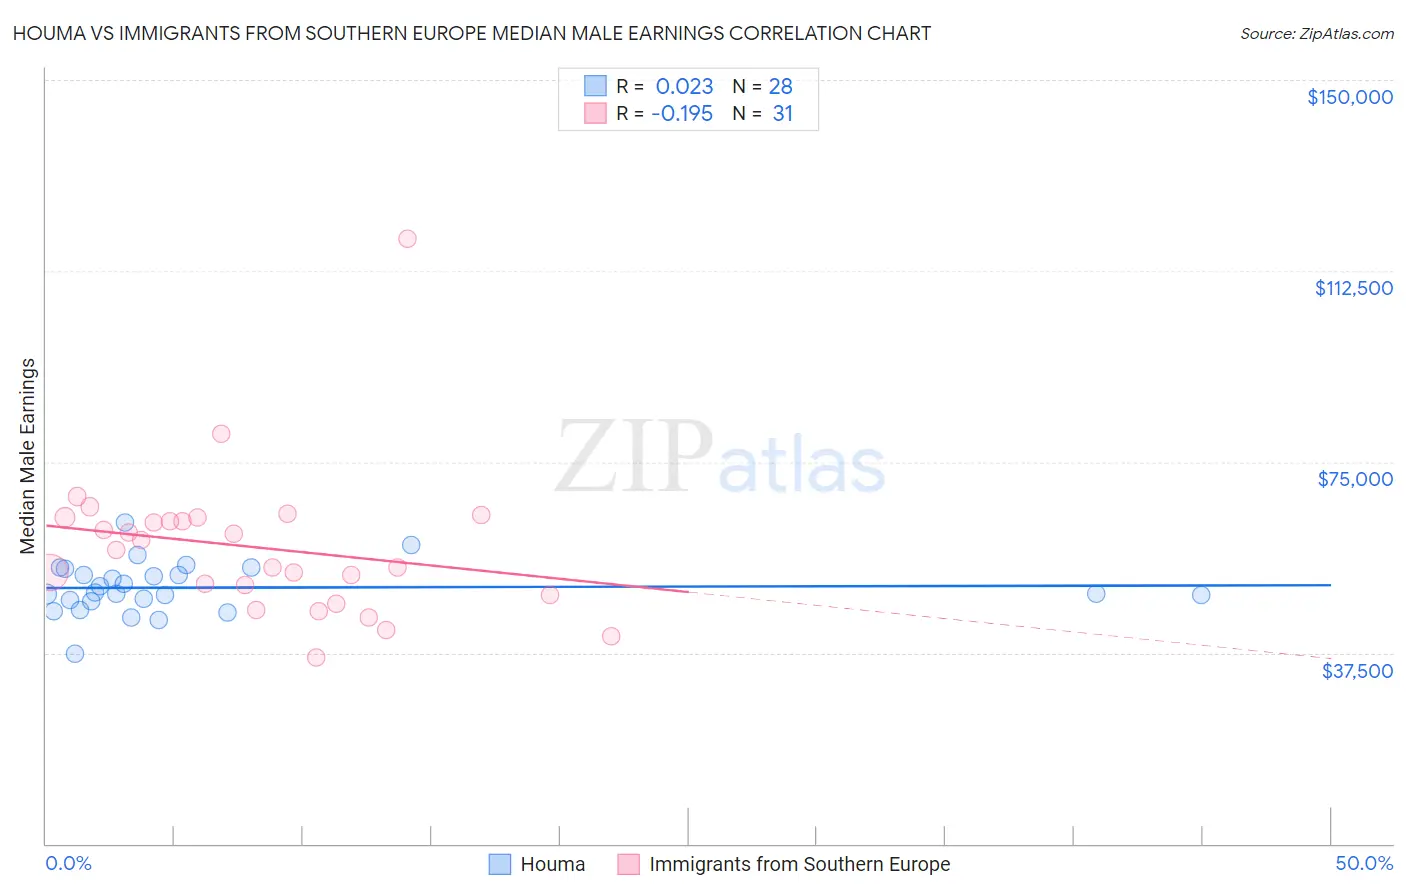 Houma vs Immigrants from Southern Europe Median Male Earnings